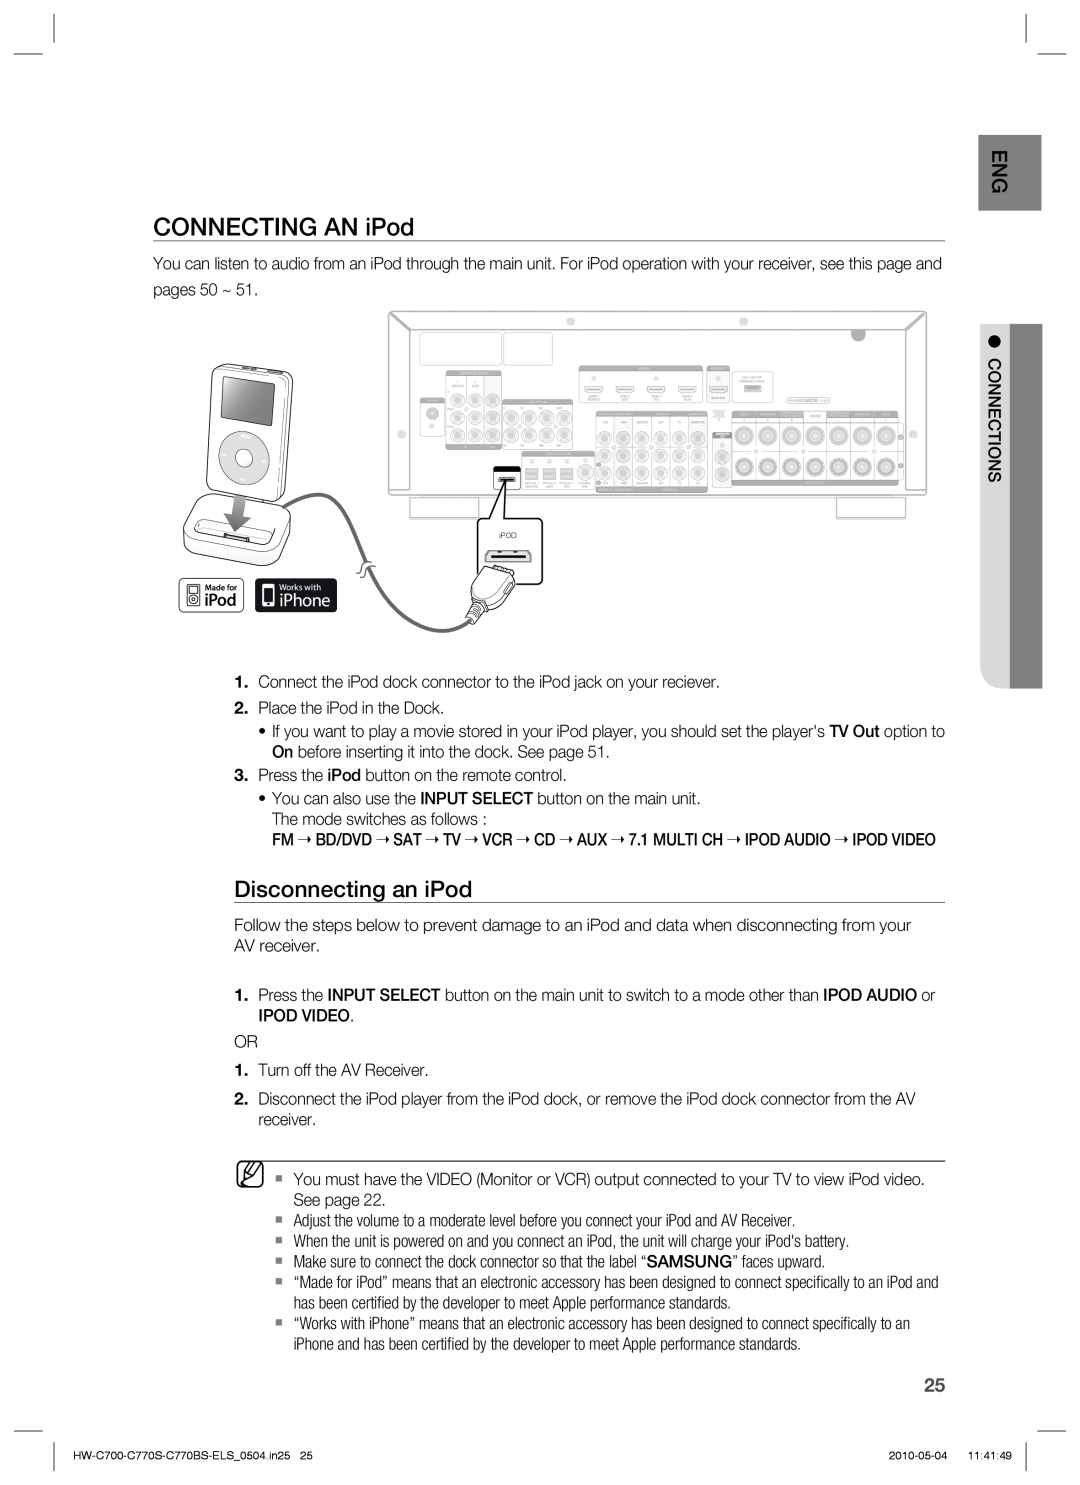 Samsung HW-C700/XEE, HW-C770S/XEN, HW-C700B/XEN, HW-C700/XEN, HW-C700/EDC manual CONNECTING AN iPod, Disconnecting an iPod 